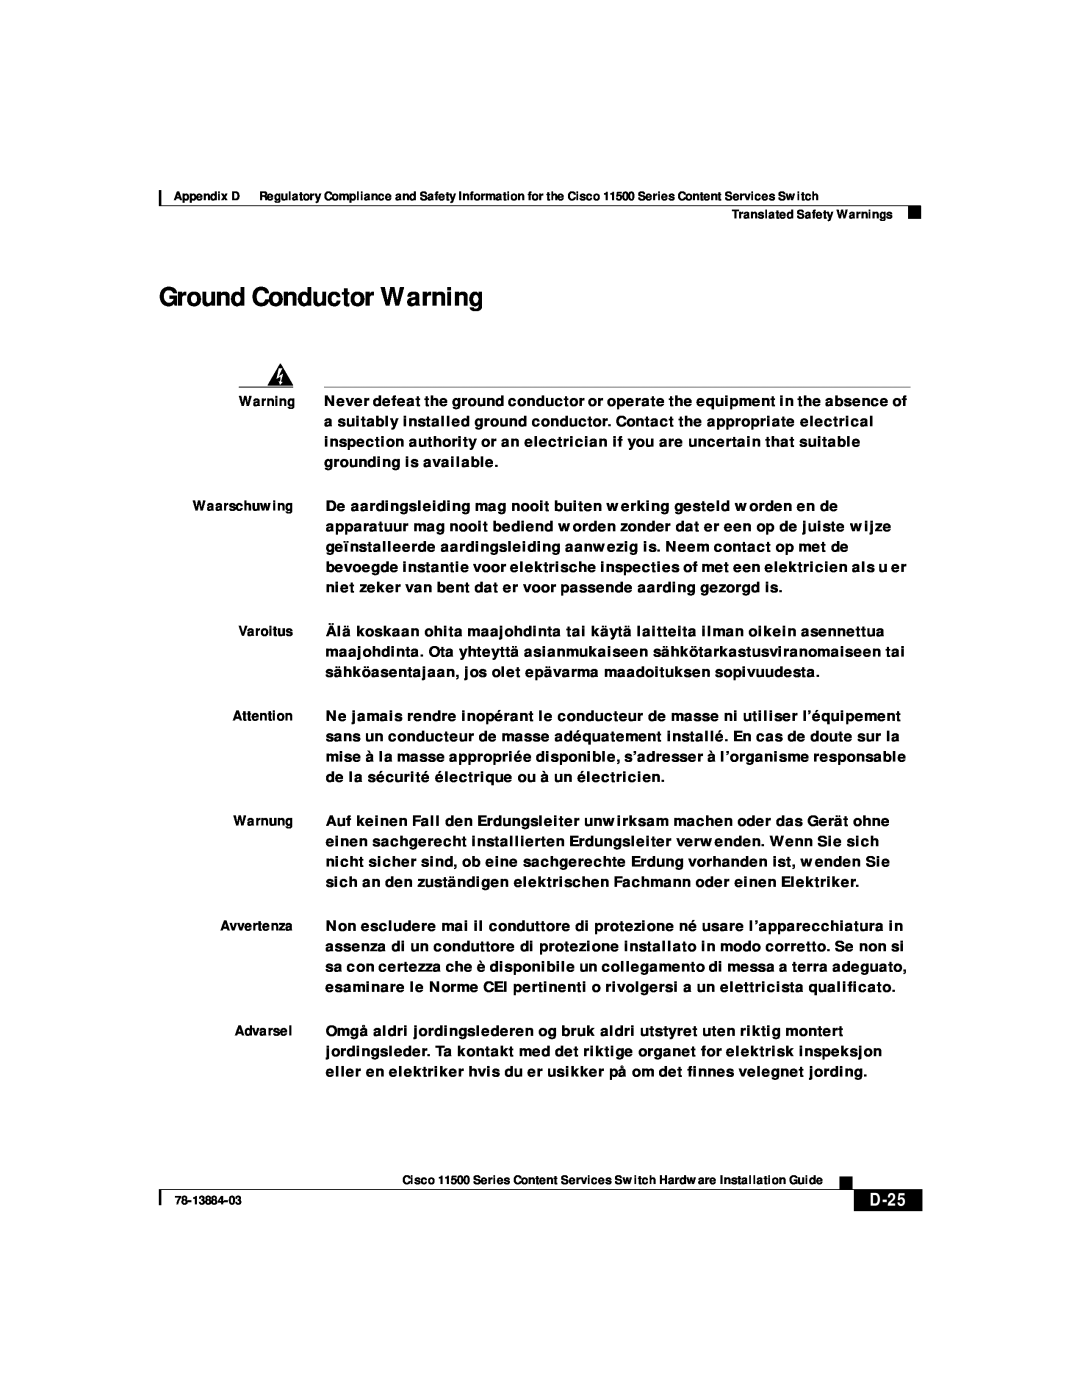 Cisco Systems 11500 Series manual Ground Conductor Warning, D-25 